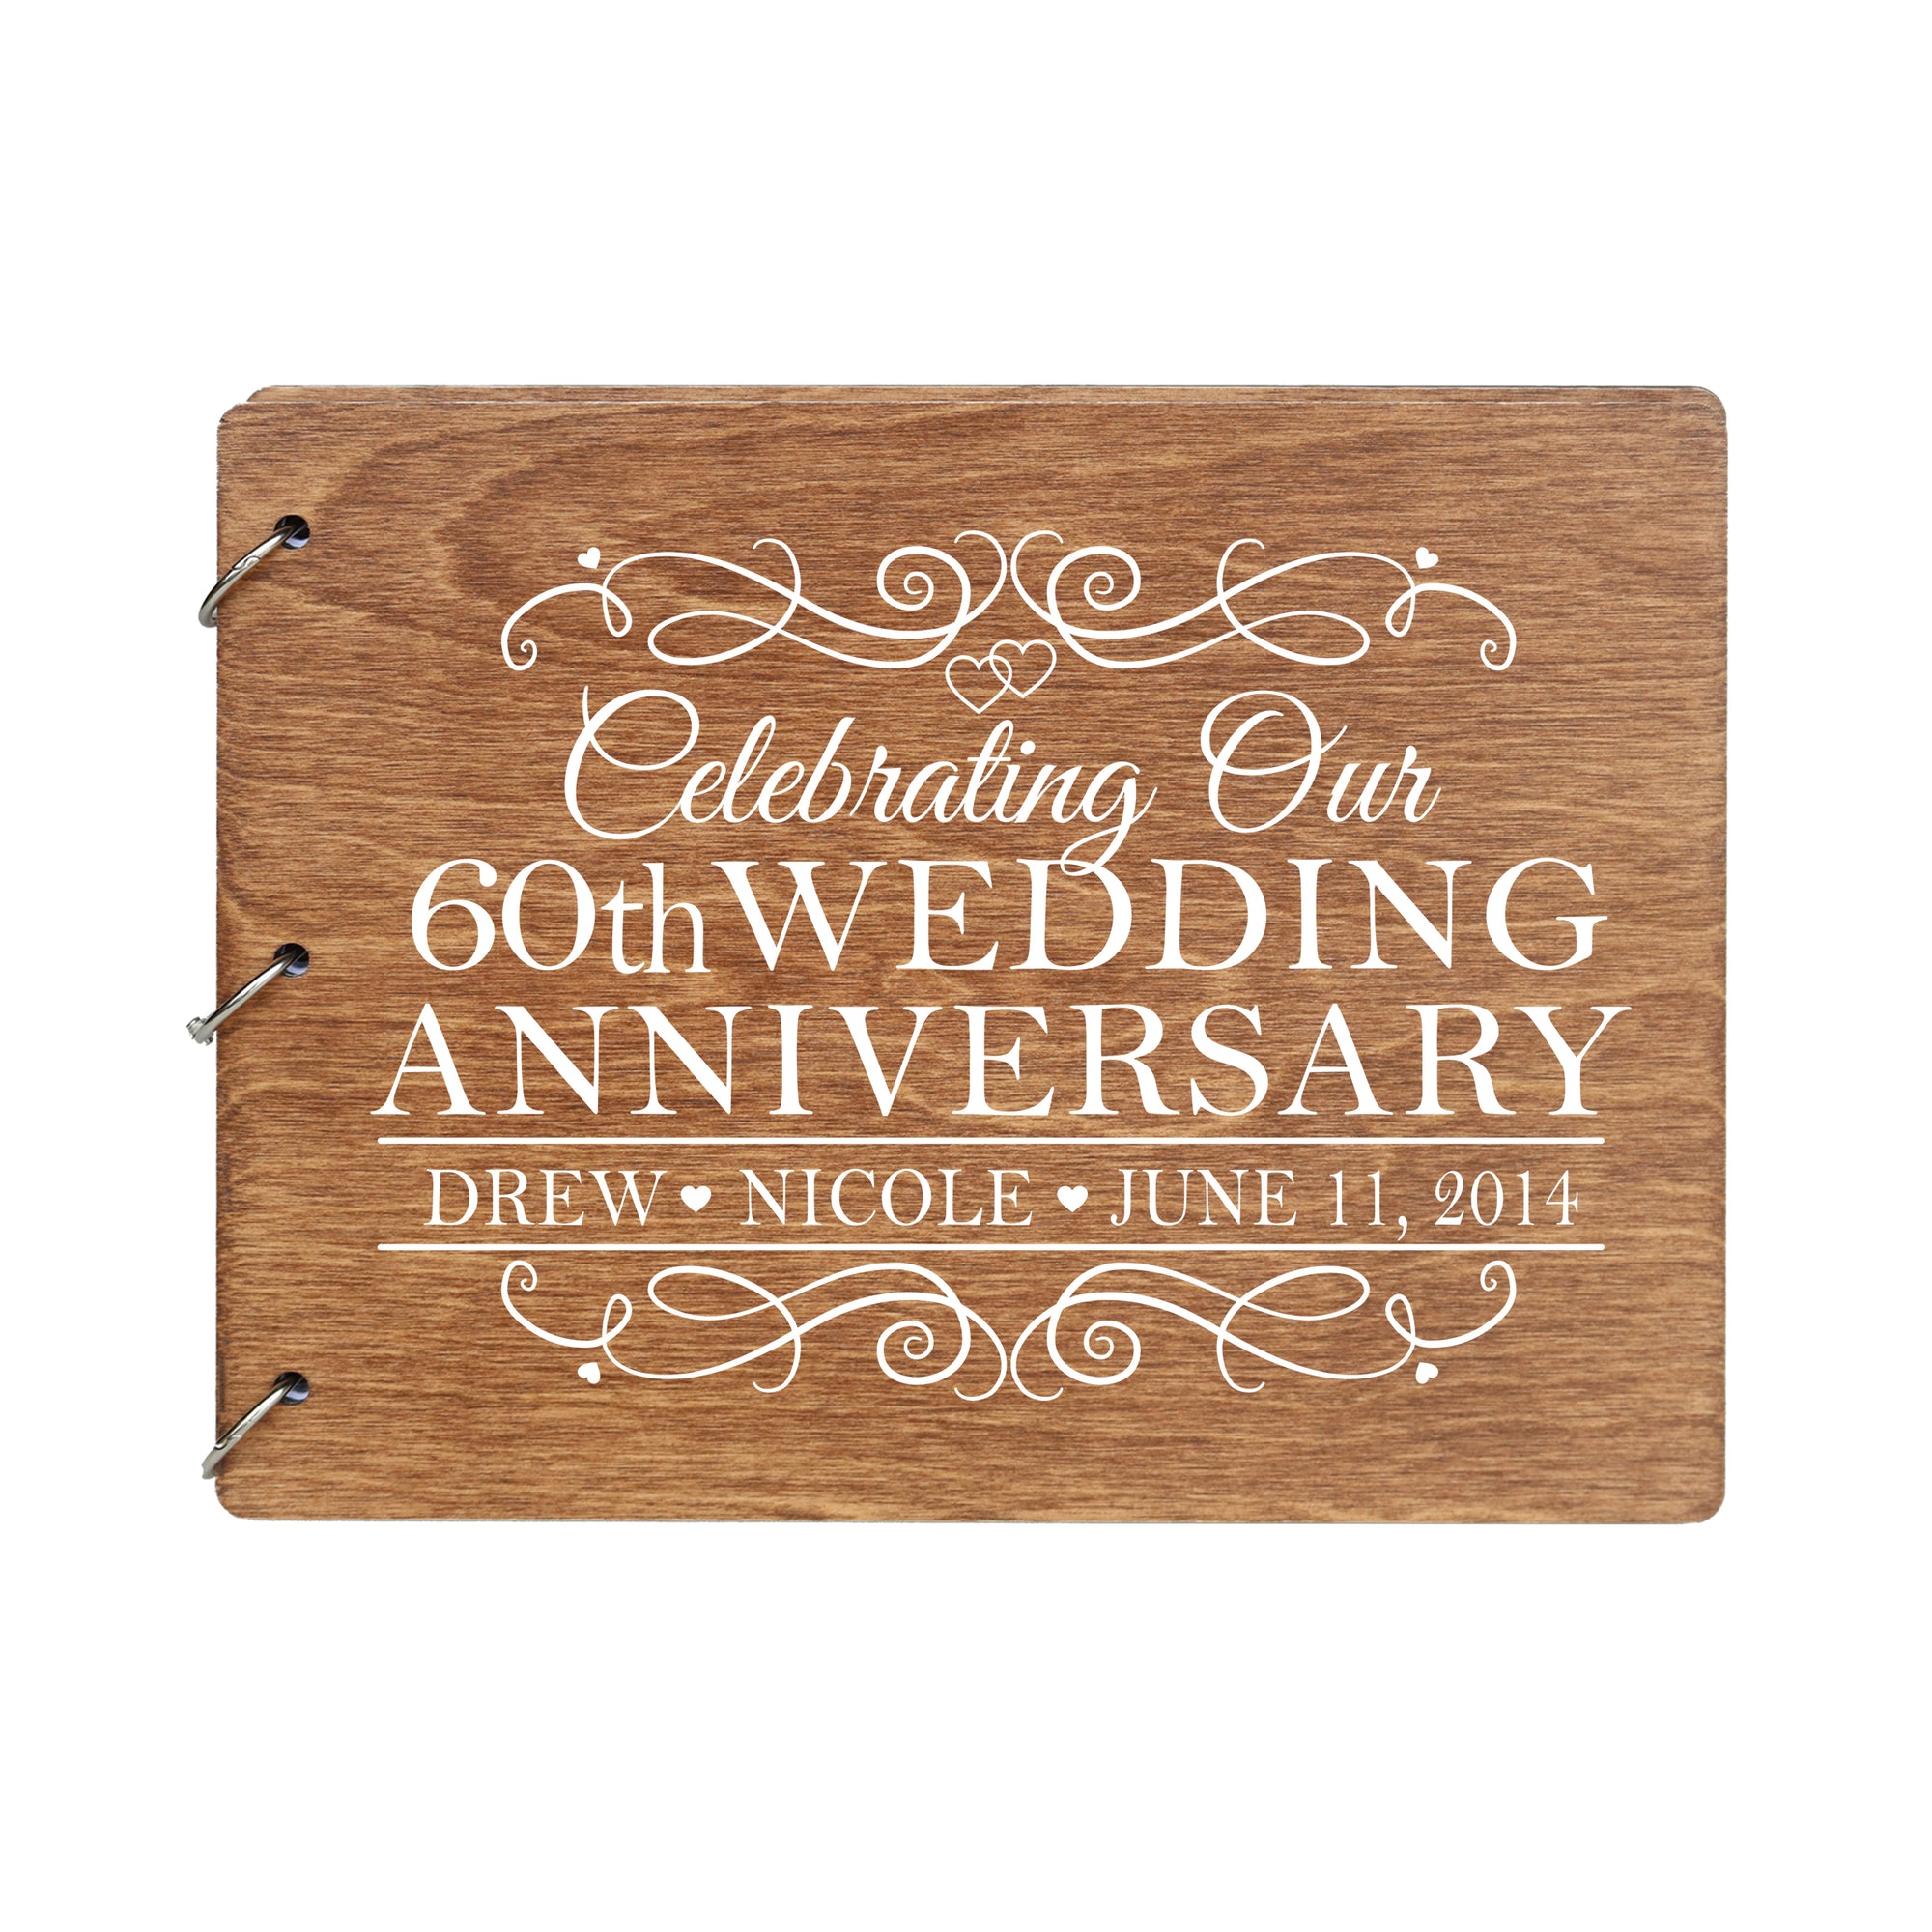 LifeSong Milestones Personalized Guestbook Sign for 60th Wedding Anniversary Gift Ideas